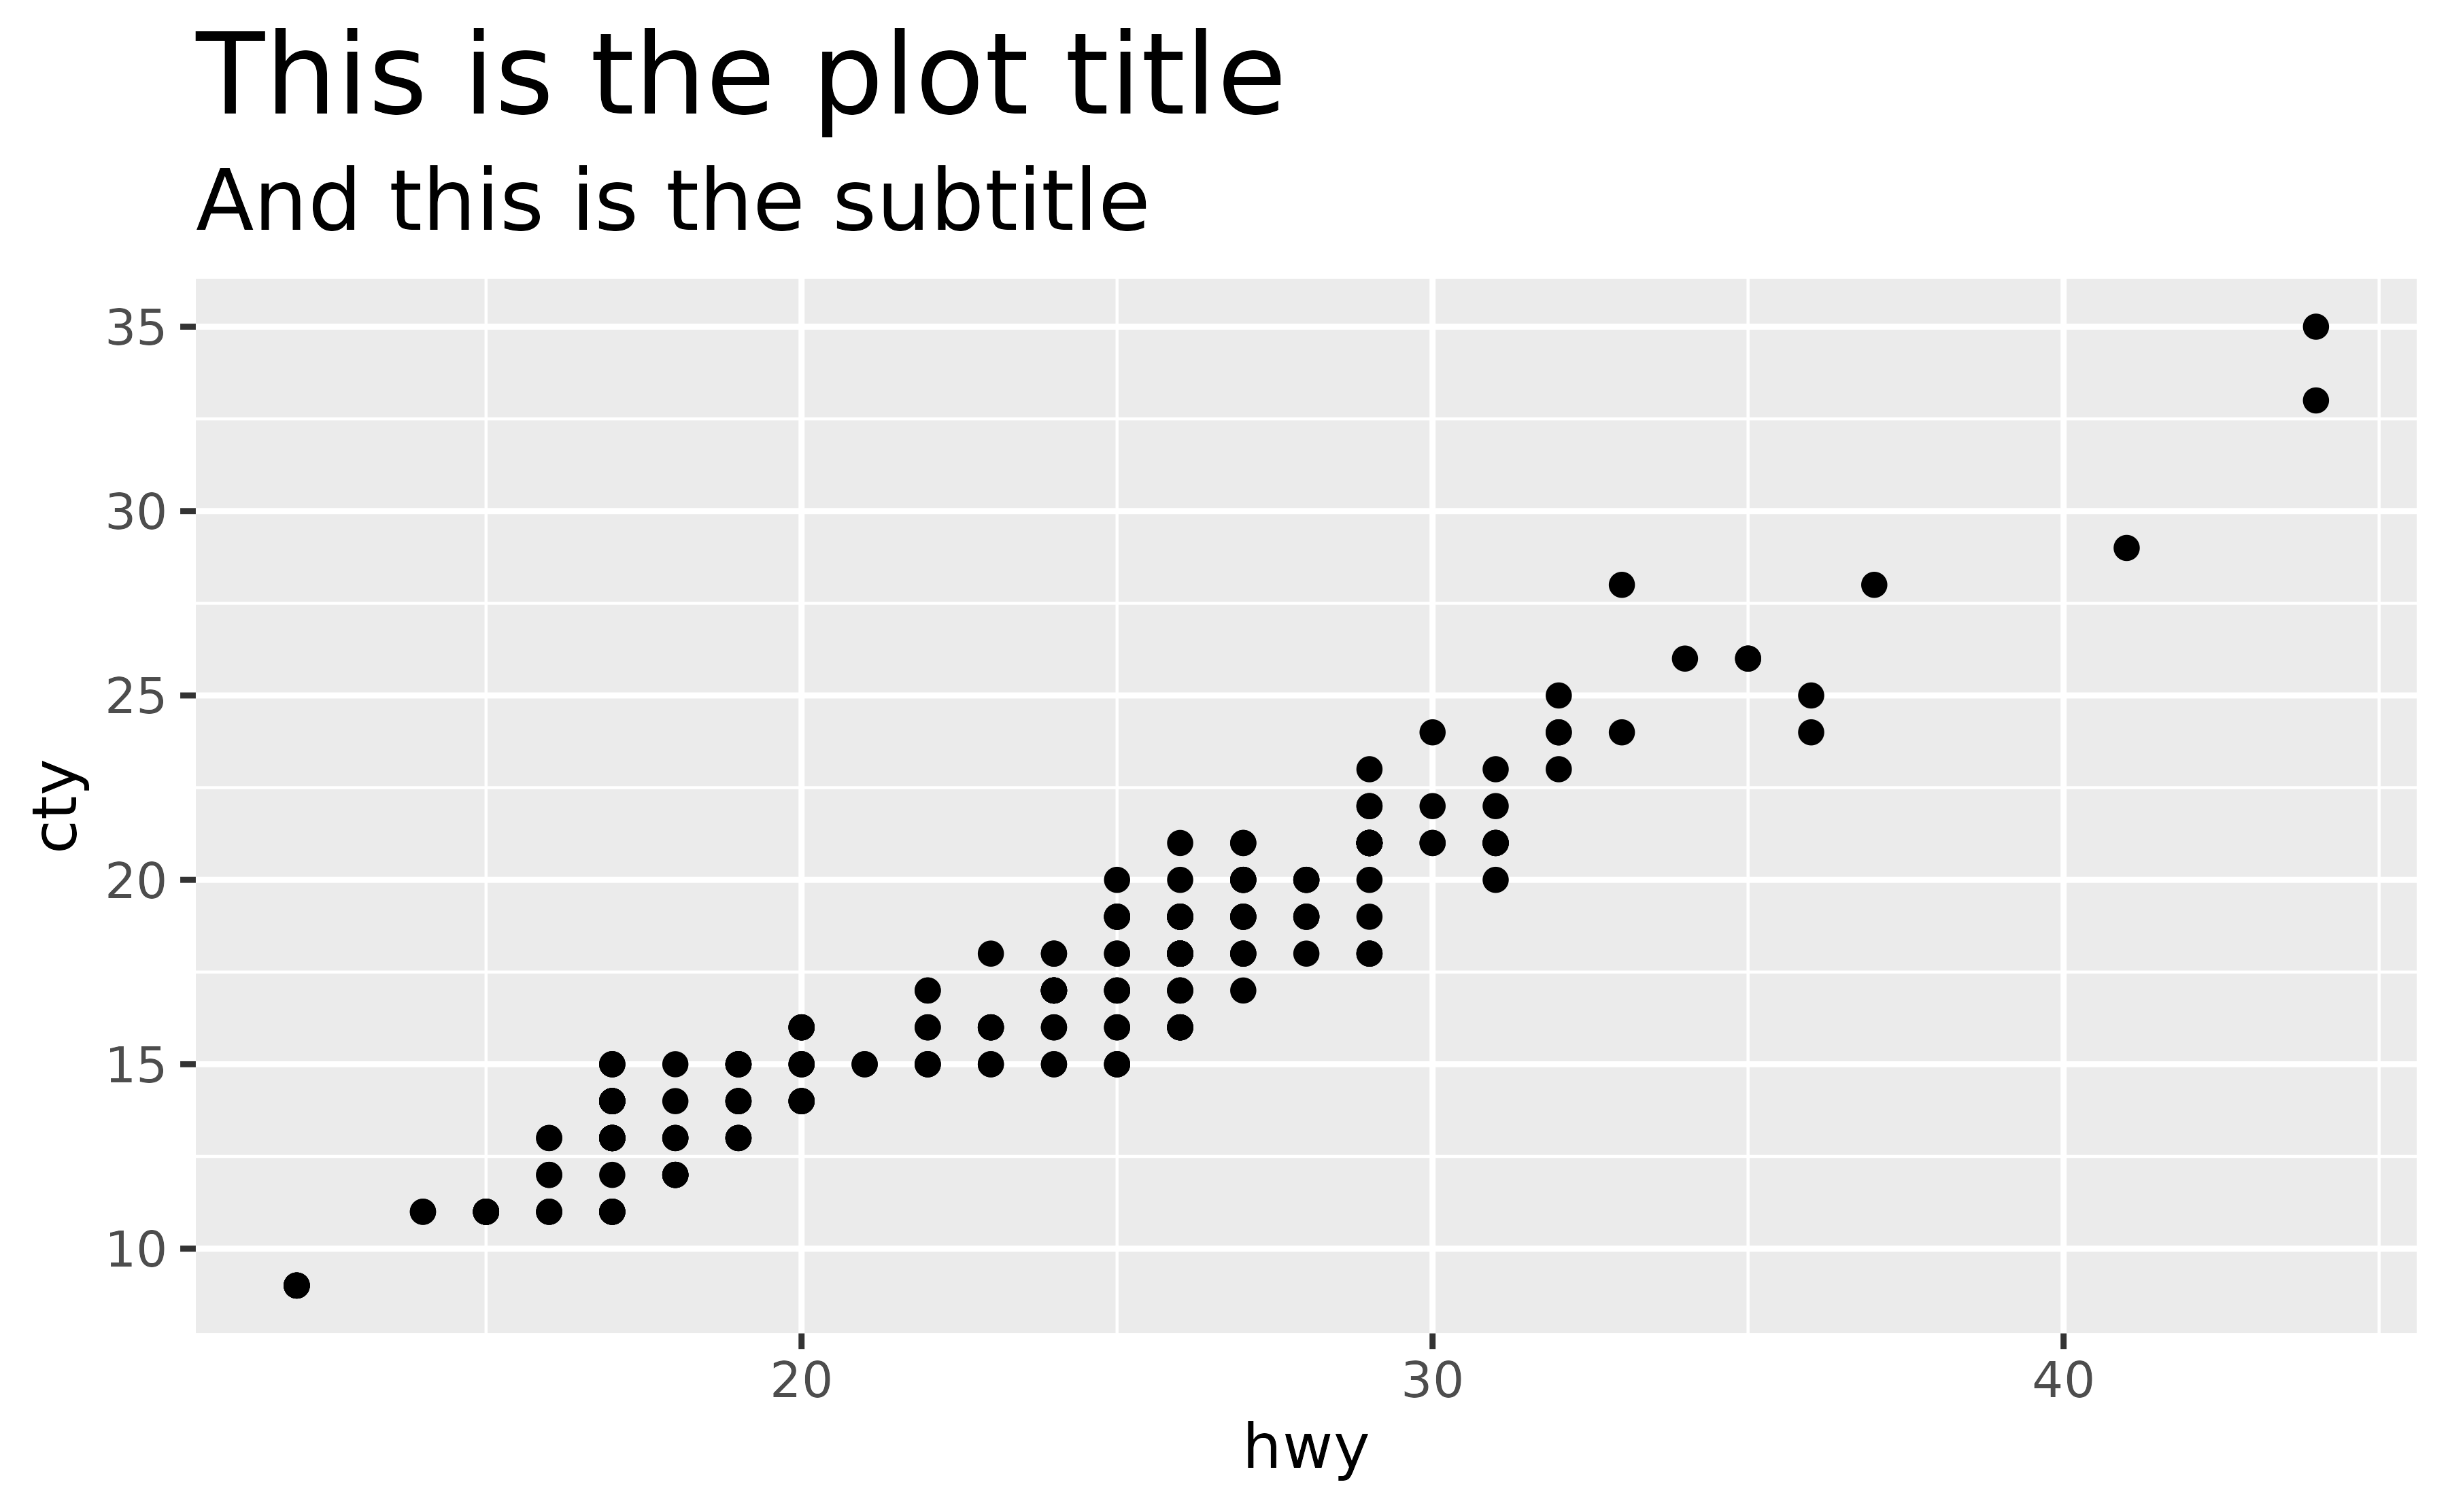 A scatter plot showing the highway miles per gallon on the x-axis and city miles per gallon on the y-axis. The plot has a large title displaying 'This is the plot title' and a less large subtitle displaying 'And this is the subtitle' at the top of the plot.